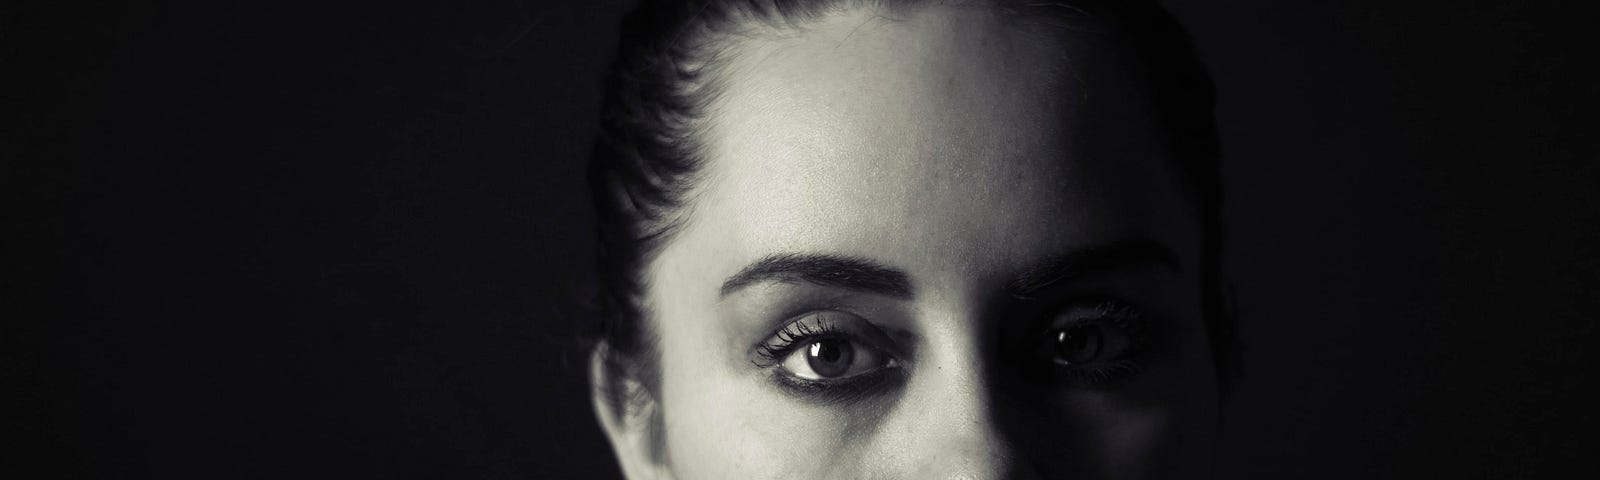 Black and white photo of a shadowed young woman with a tear stream down her face, running her dark eye makeup.